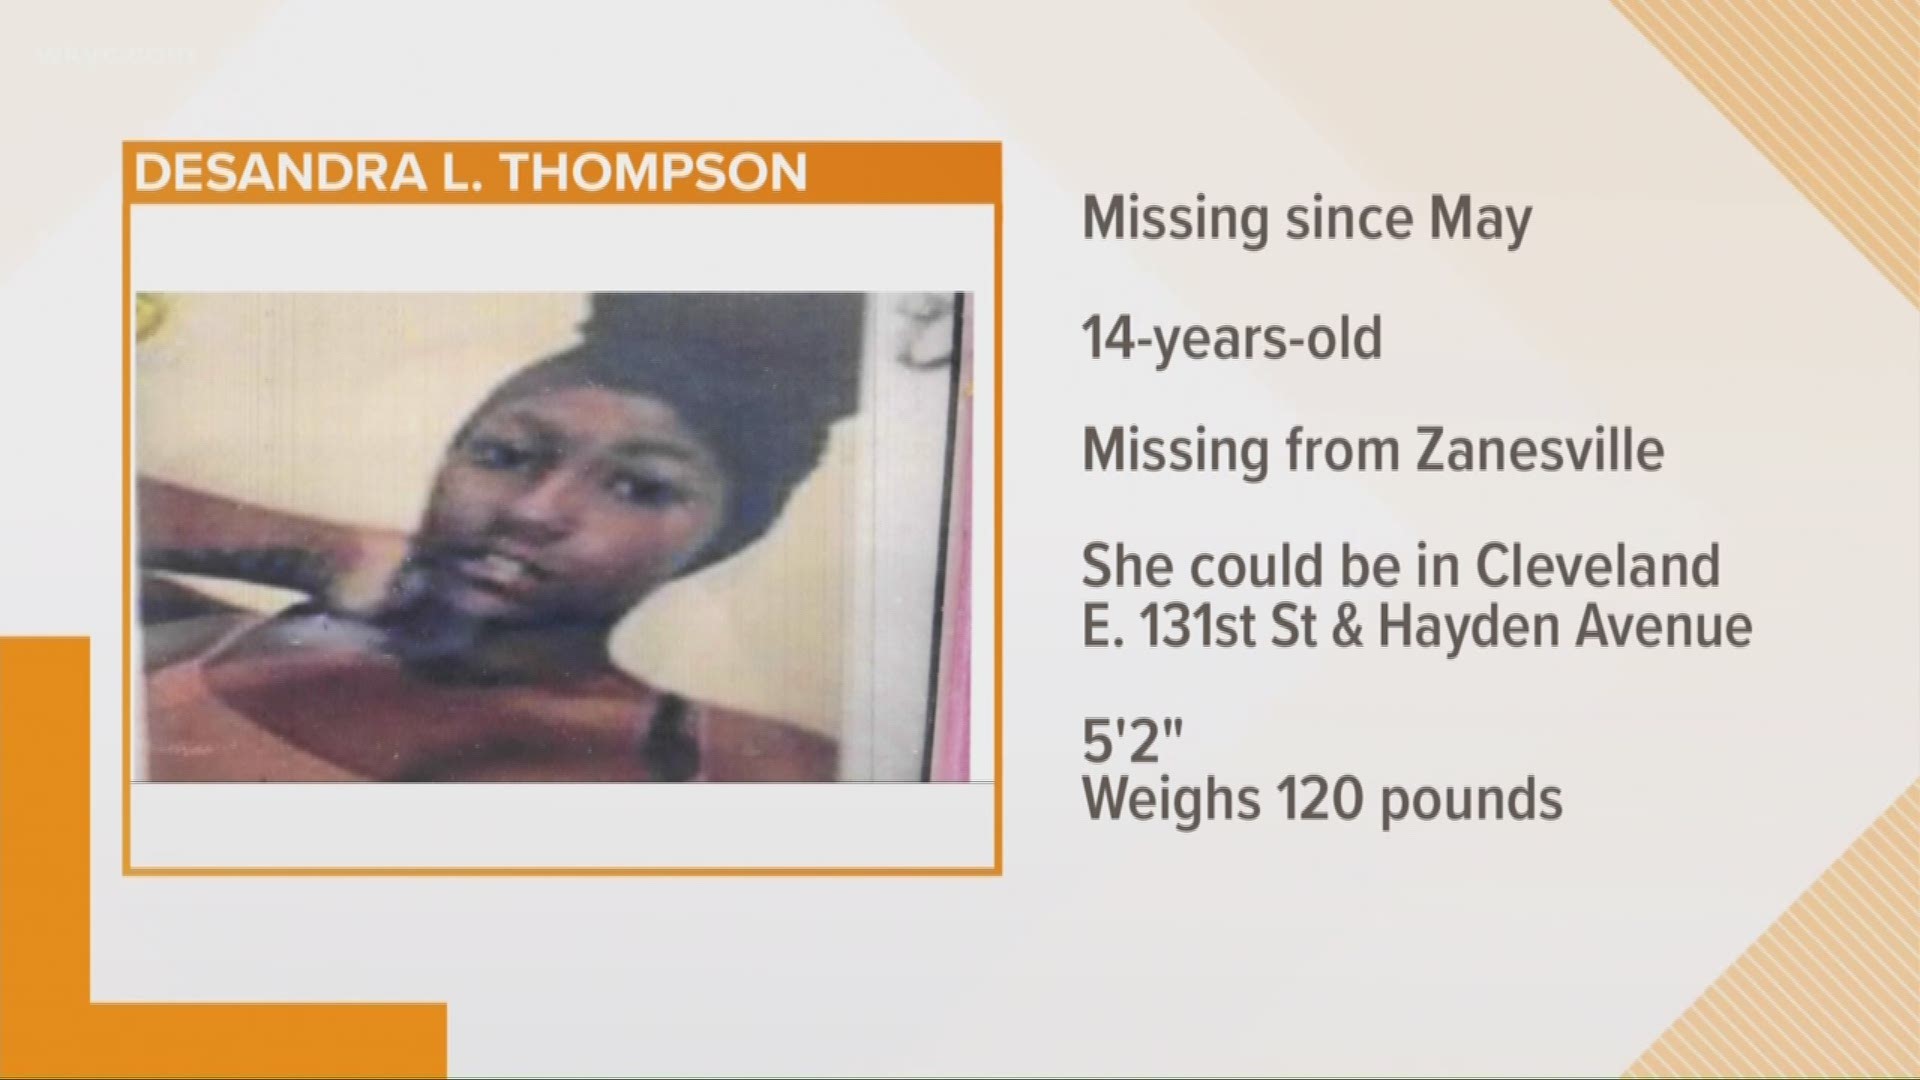 Aug. 23, 2018: Police say 14-year-old Desandra L. Thompson was initially reported missing from Zainesville, but is possibly in the area of E. 131st Street and Hayden Avenue in Cleveland.